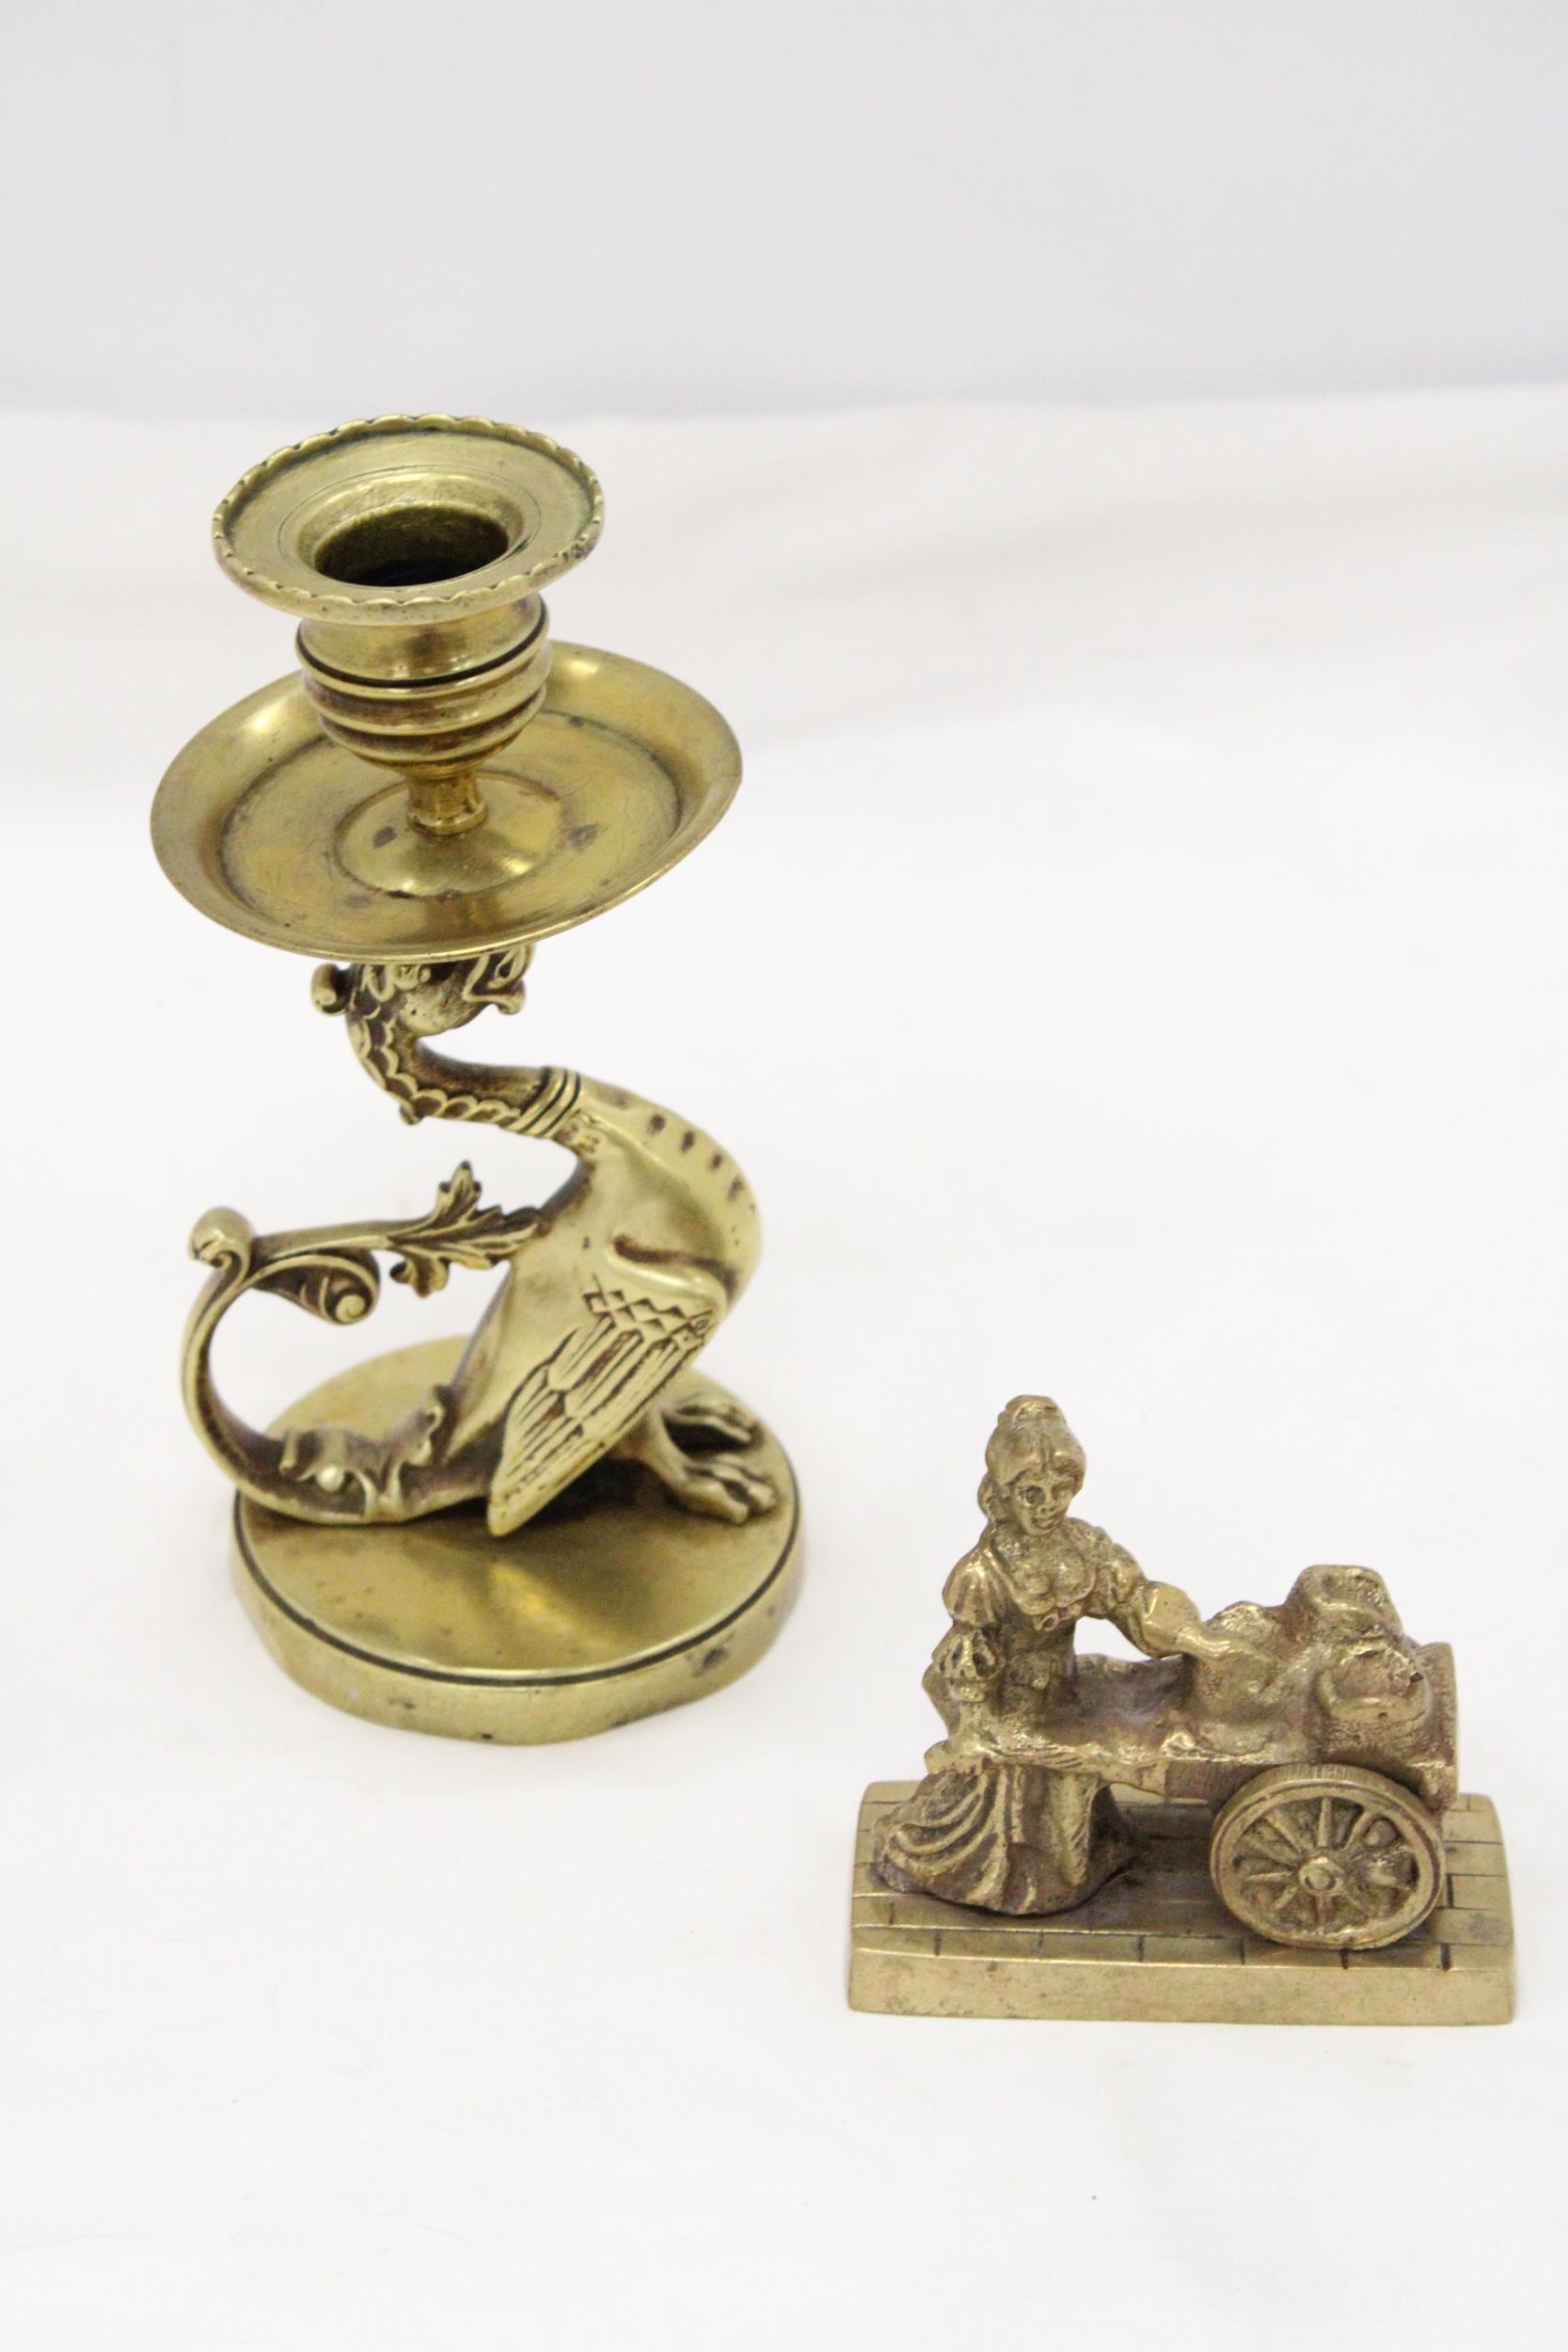 A VINTAGE BRASS GRYPHON CANDLESTICK PLUS A MOLLY MALONE FIGURE